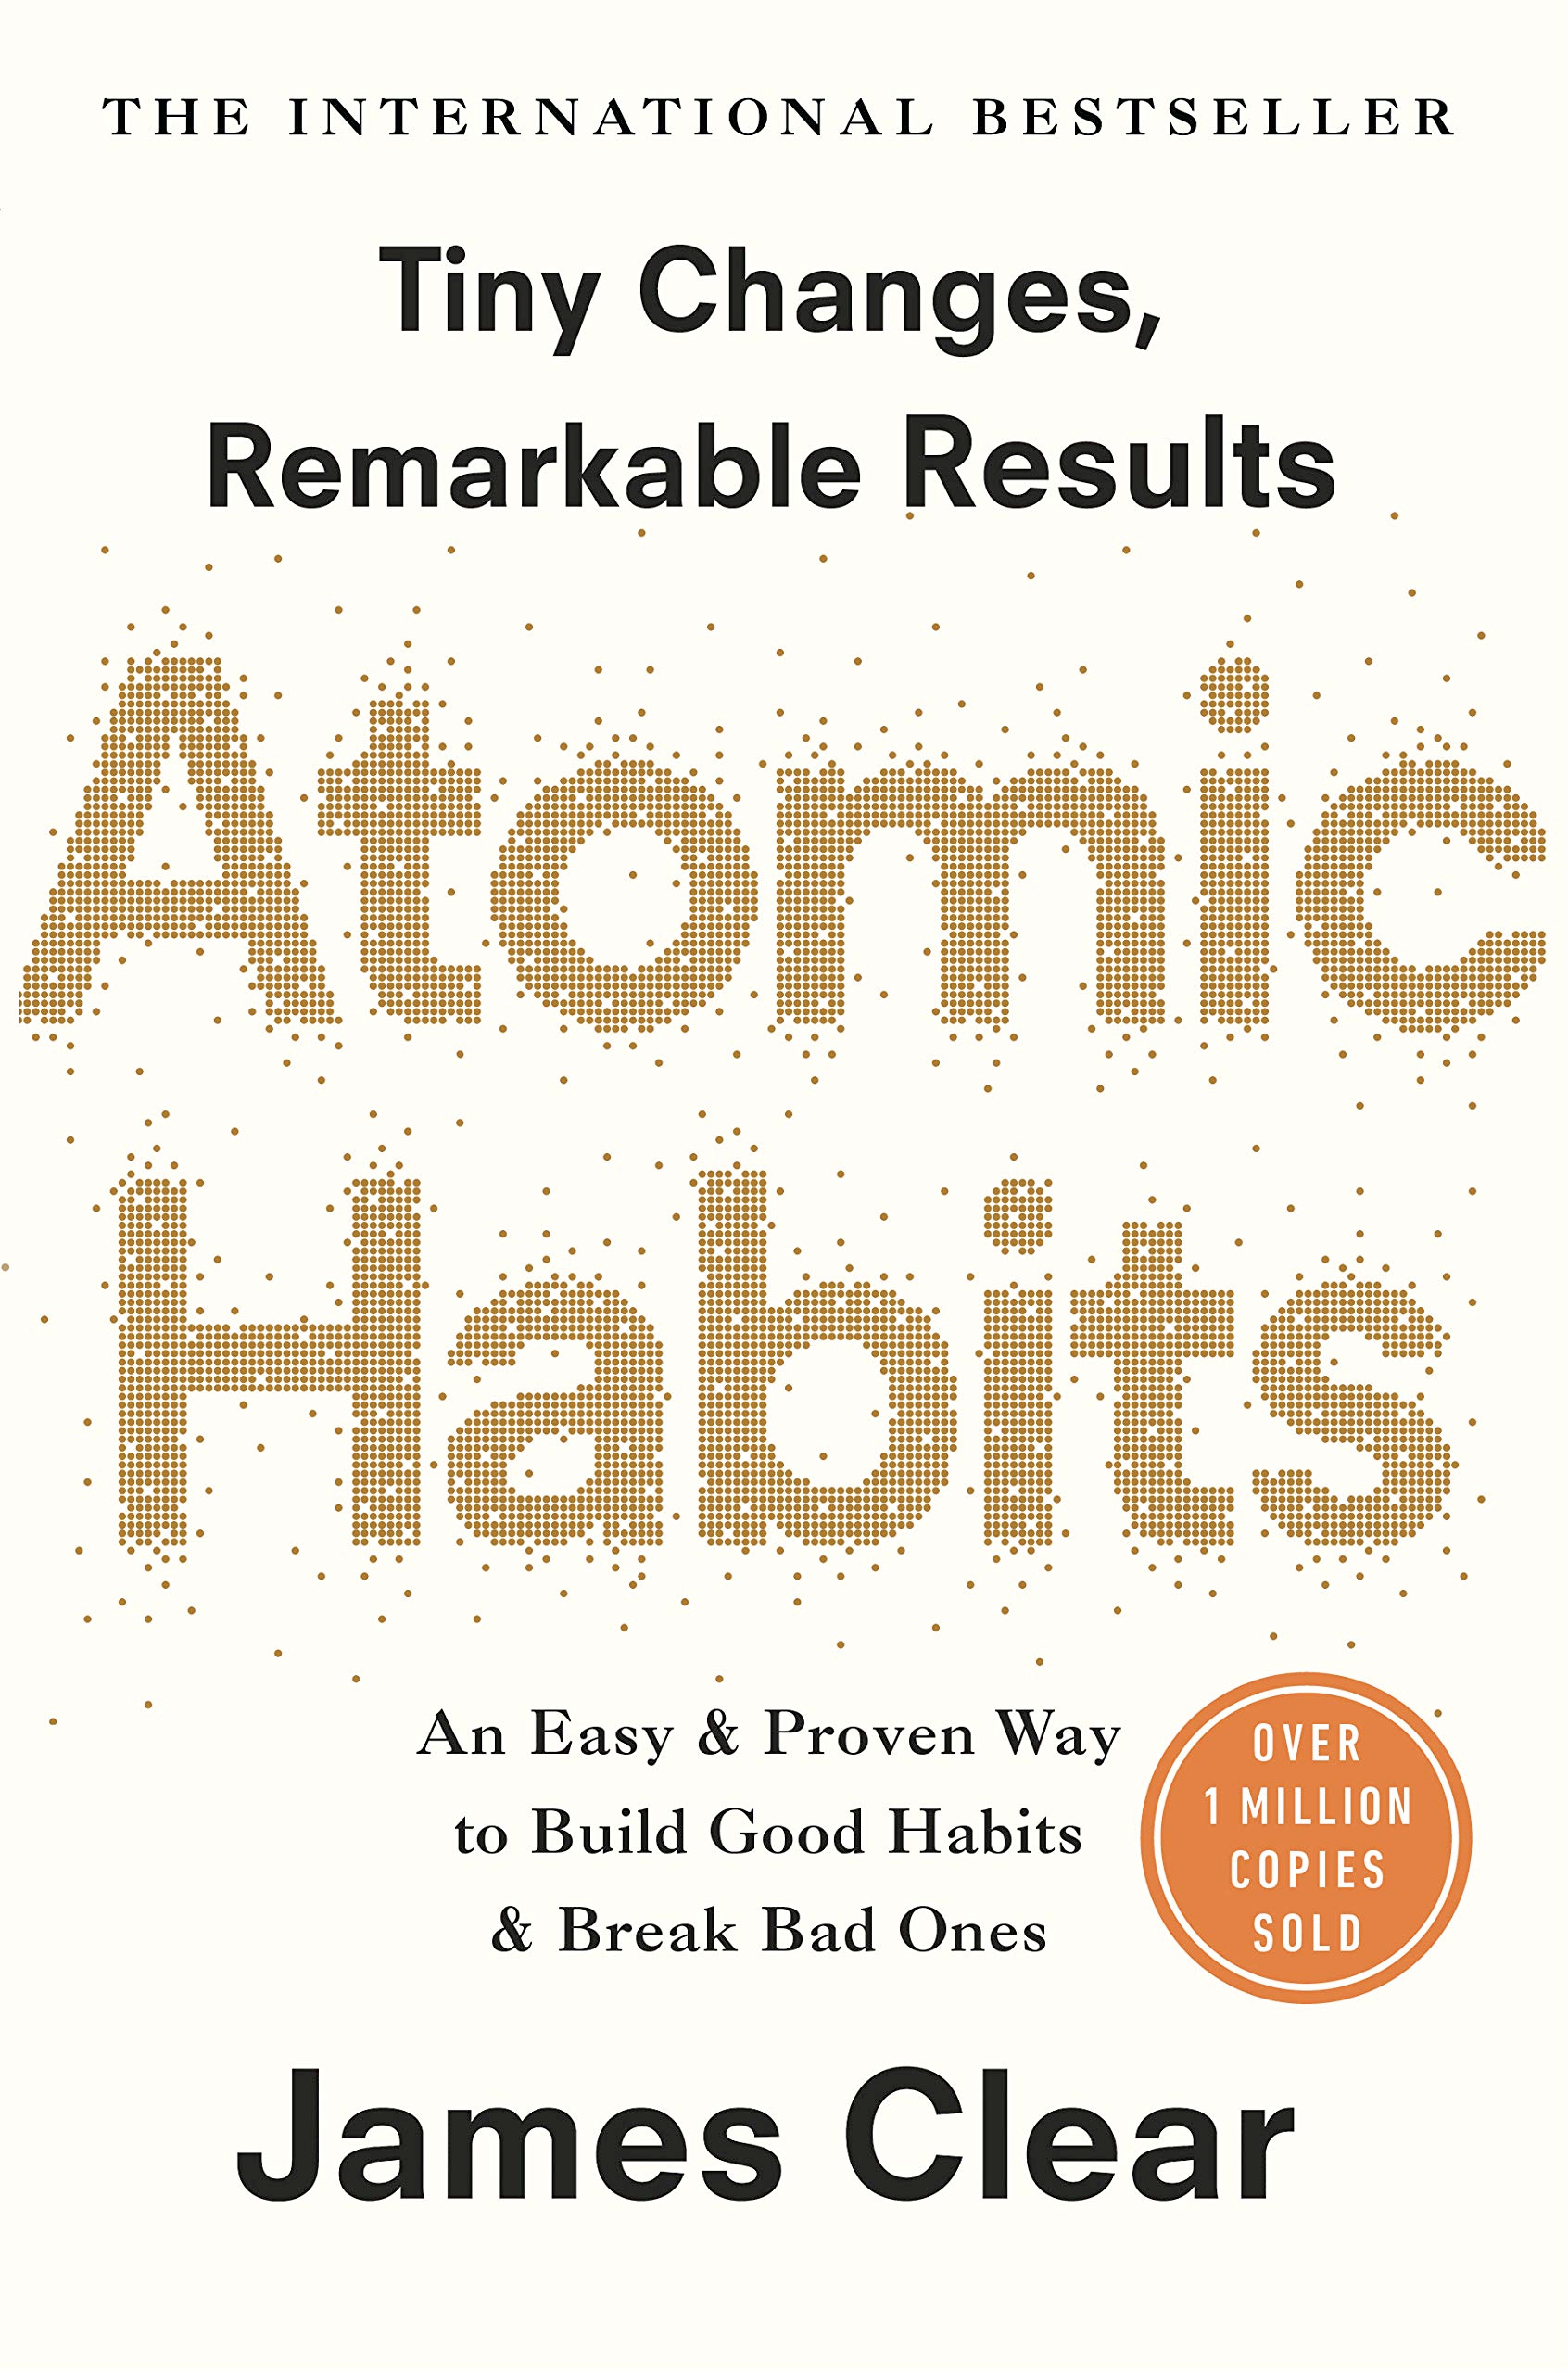 I also read the popular **Atomic Habits** book by **James Clear.** It was *the right book at the right time* for me, helping to become more mindful of how I spent my time. I also understand the book's popularity: it reads easily and does a good job at articulating *Compound Effort* and giving practical advice about habit building.